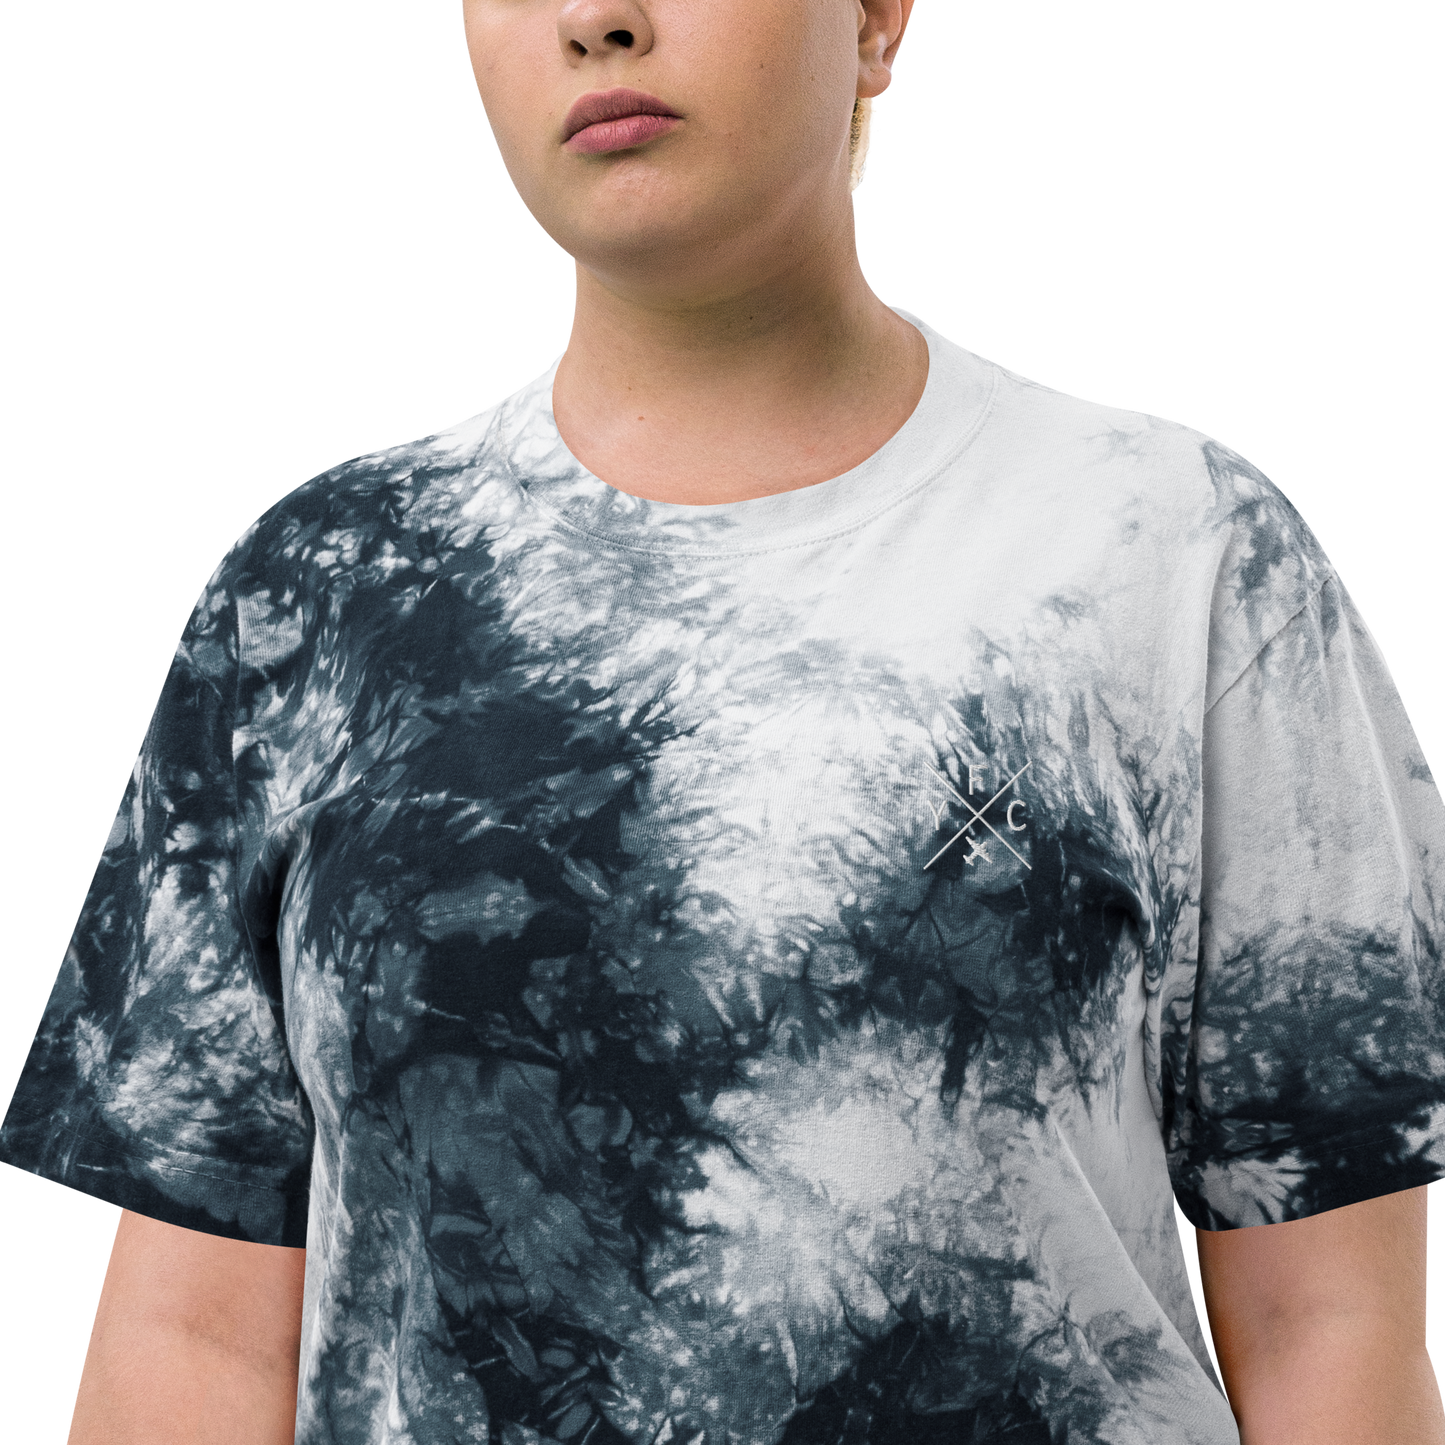 YHM Designs - YFC Fredericton Oversized Tie-Dye T-Shirt - Crossed-X Design with Airport Code and Vintage Propliner - White Embroidery - Image 18